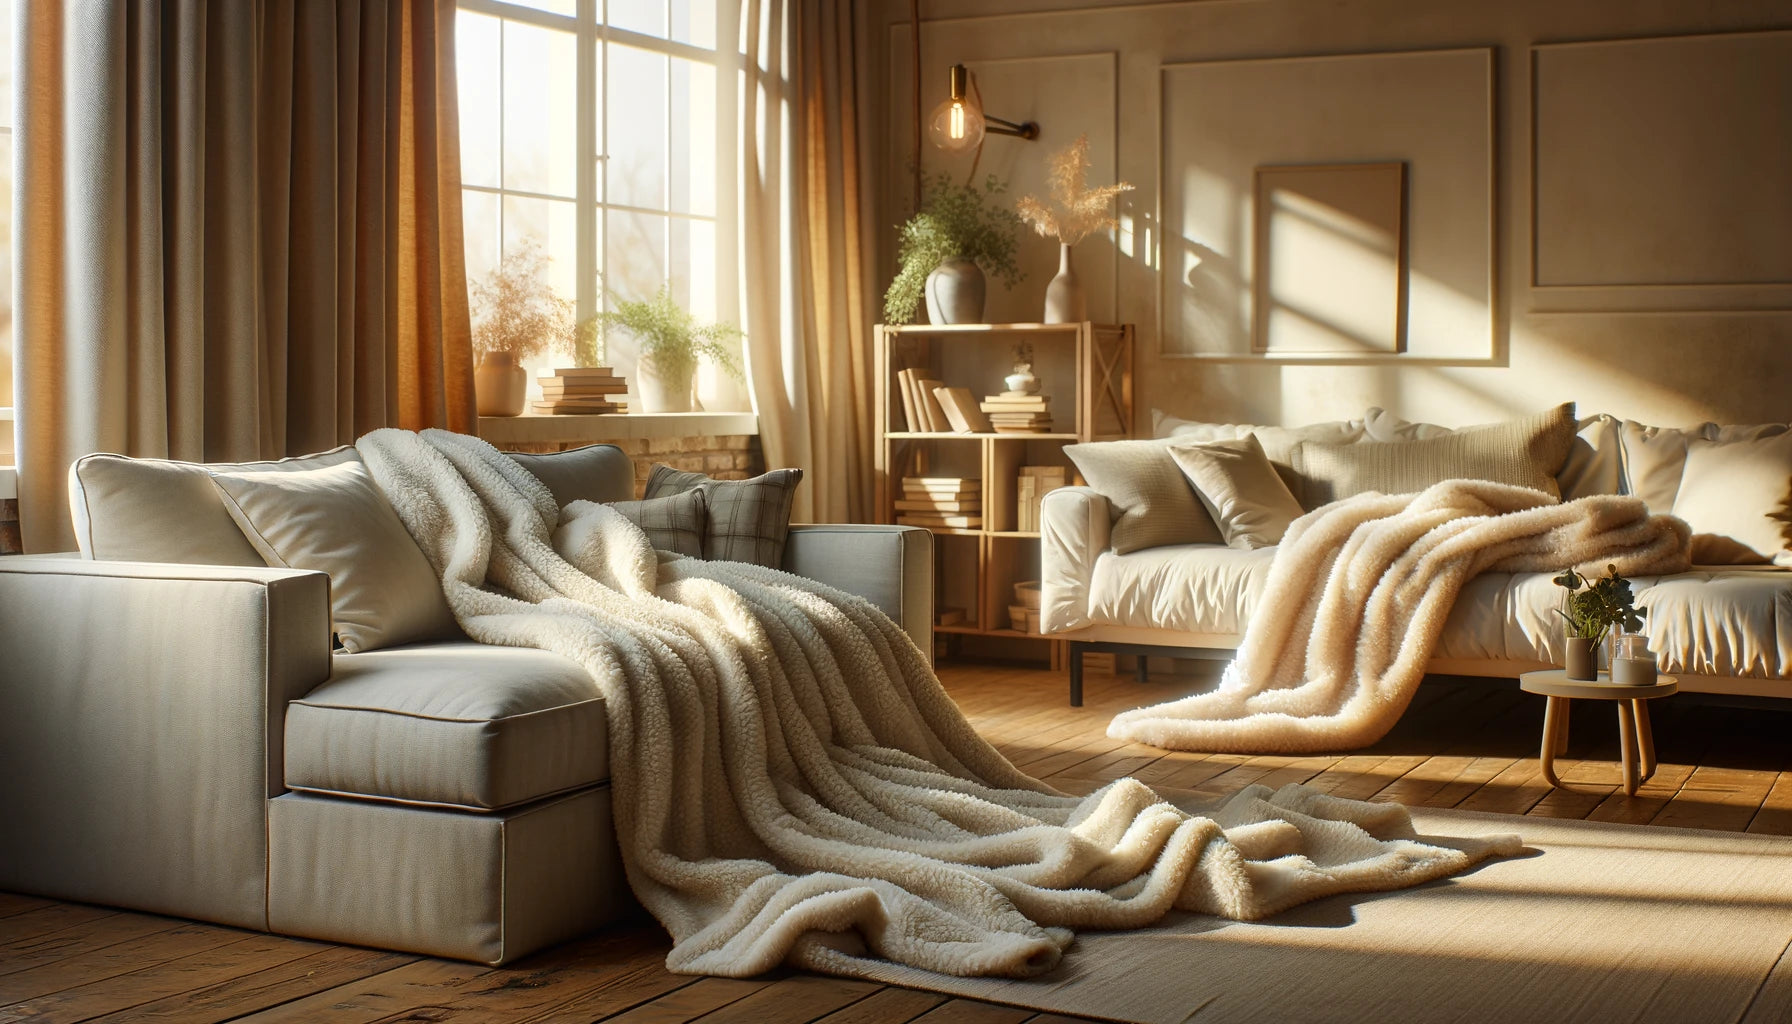 Fleece Blanket vs Comforter: Choosing the Right Warmth for Your Home